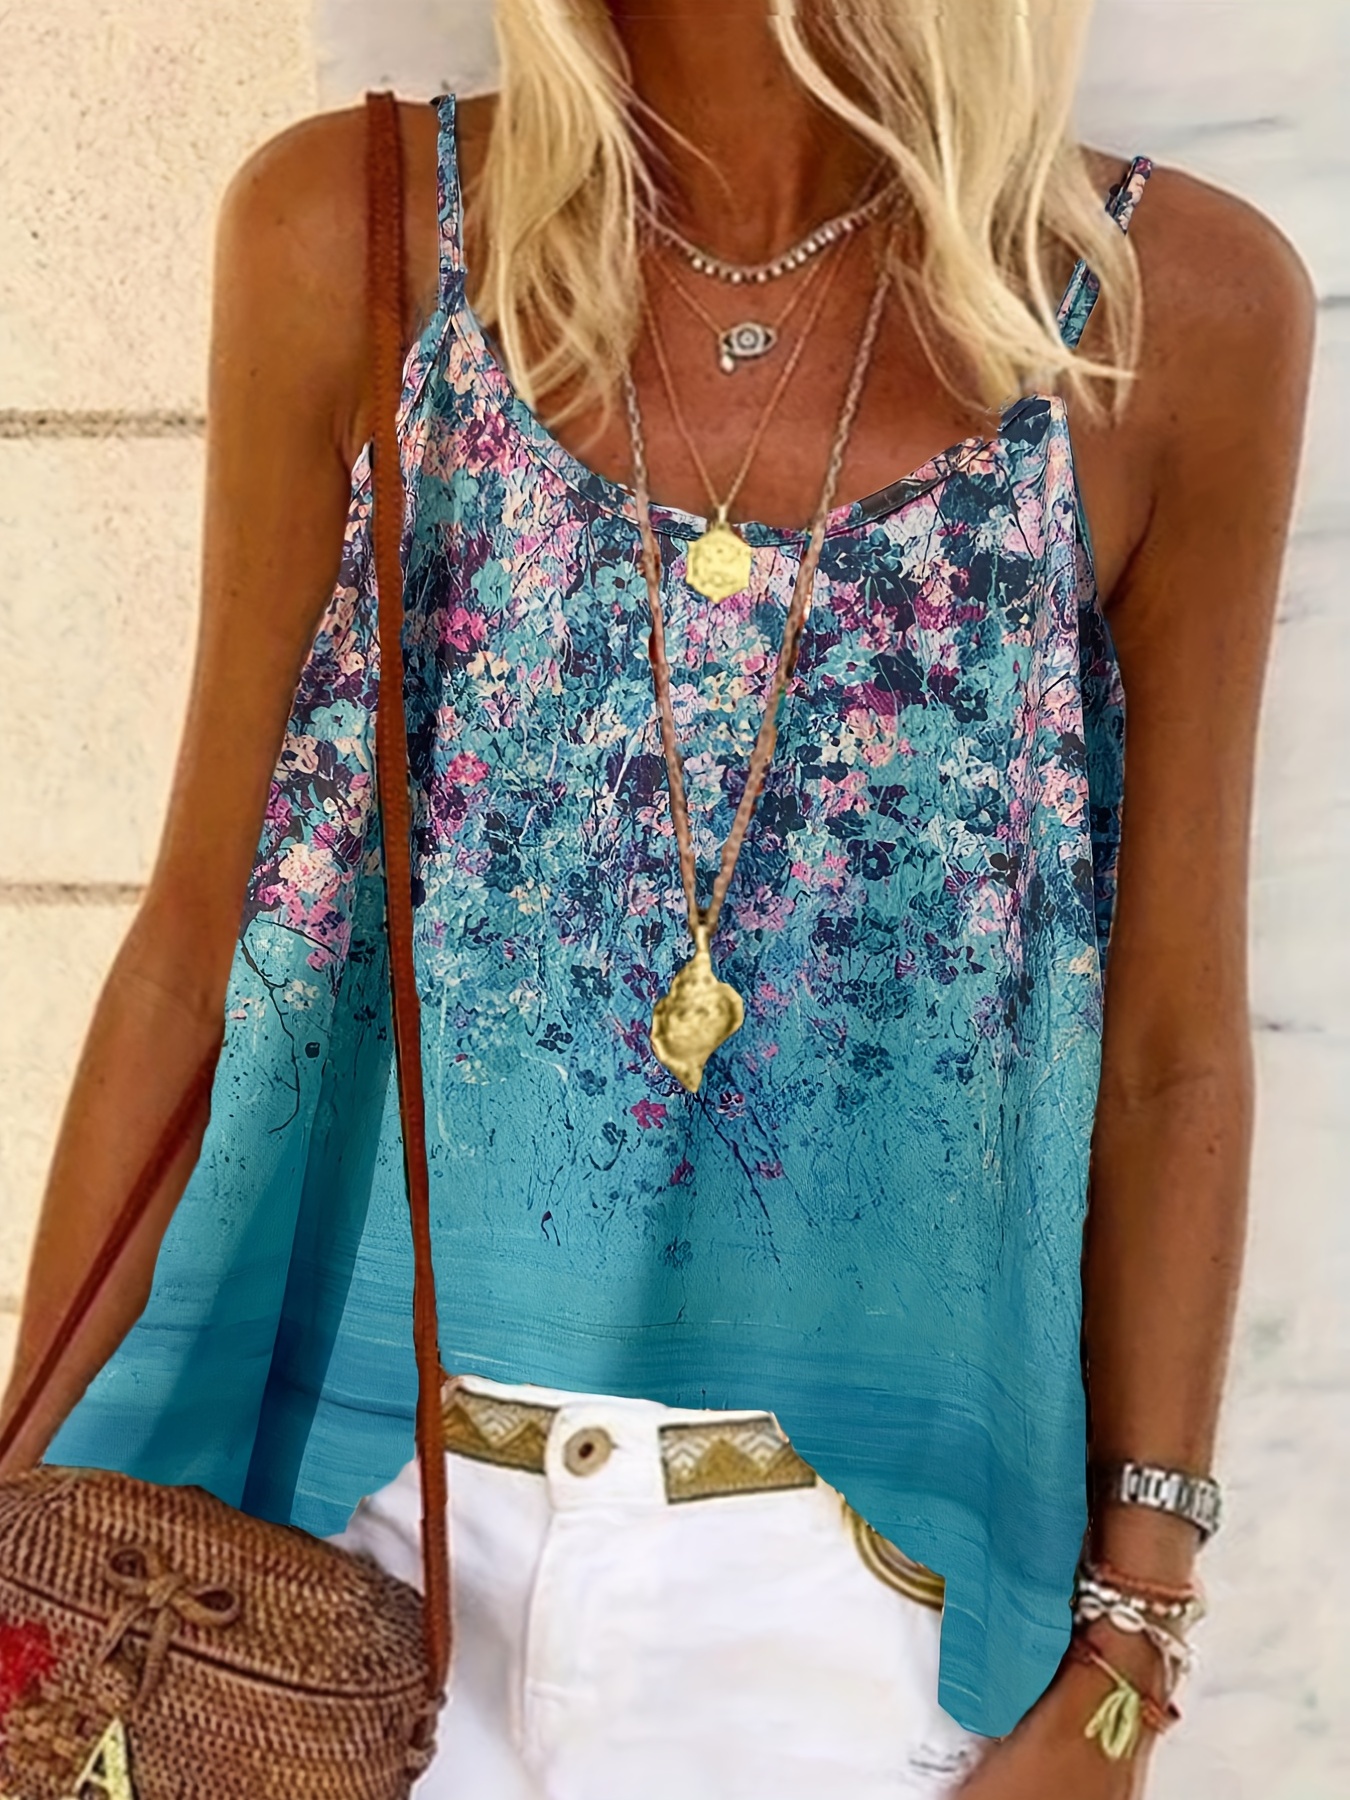 Boho Chic Outfit, Blue Floral Tank Top